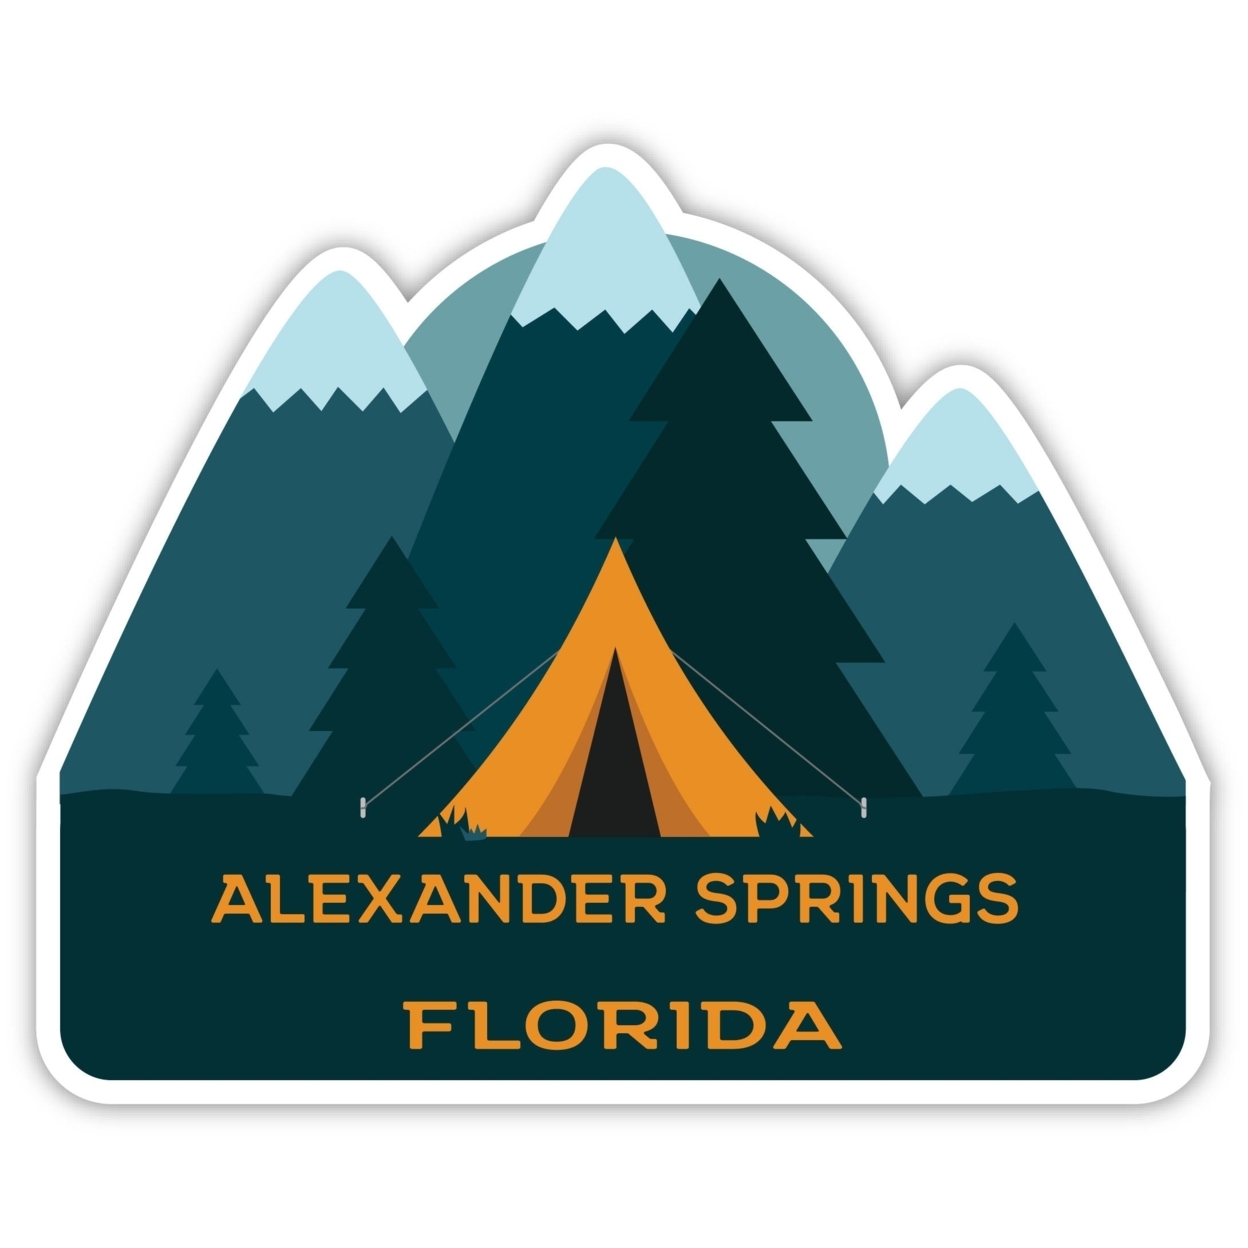 Alexander Springs Florida Souvenir Decorative Stickers (Choose Theme And Size) - 4-Pack, 4-Inch, Bear